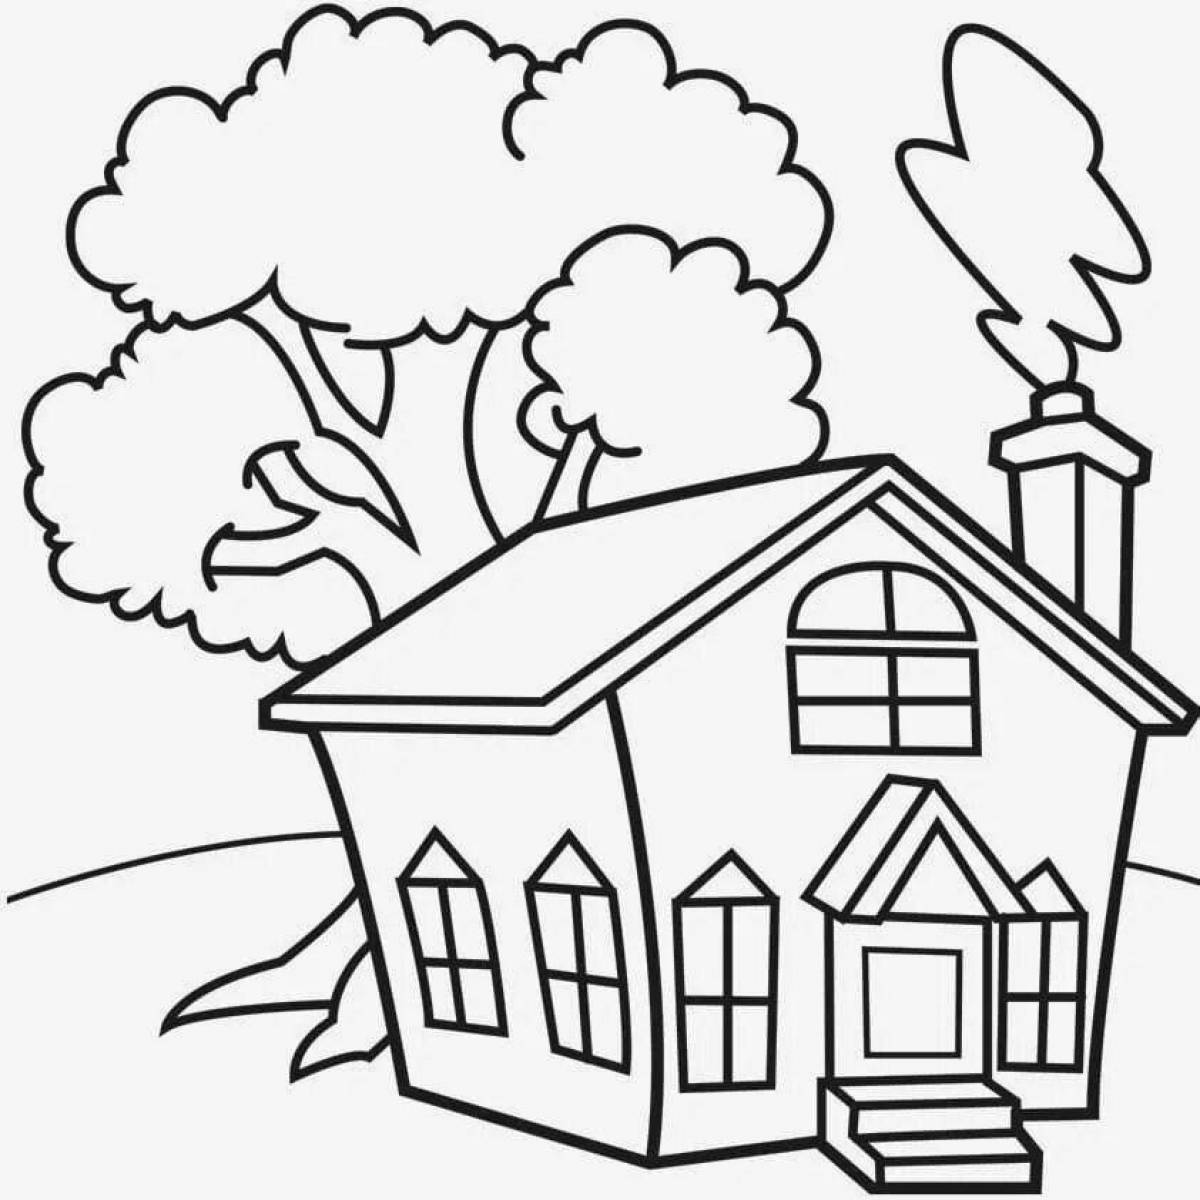 Coloring book funny house for kids